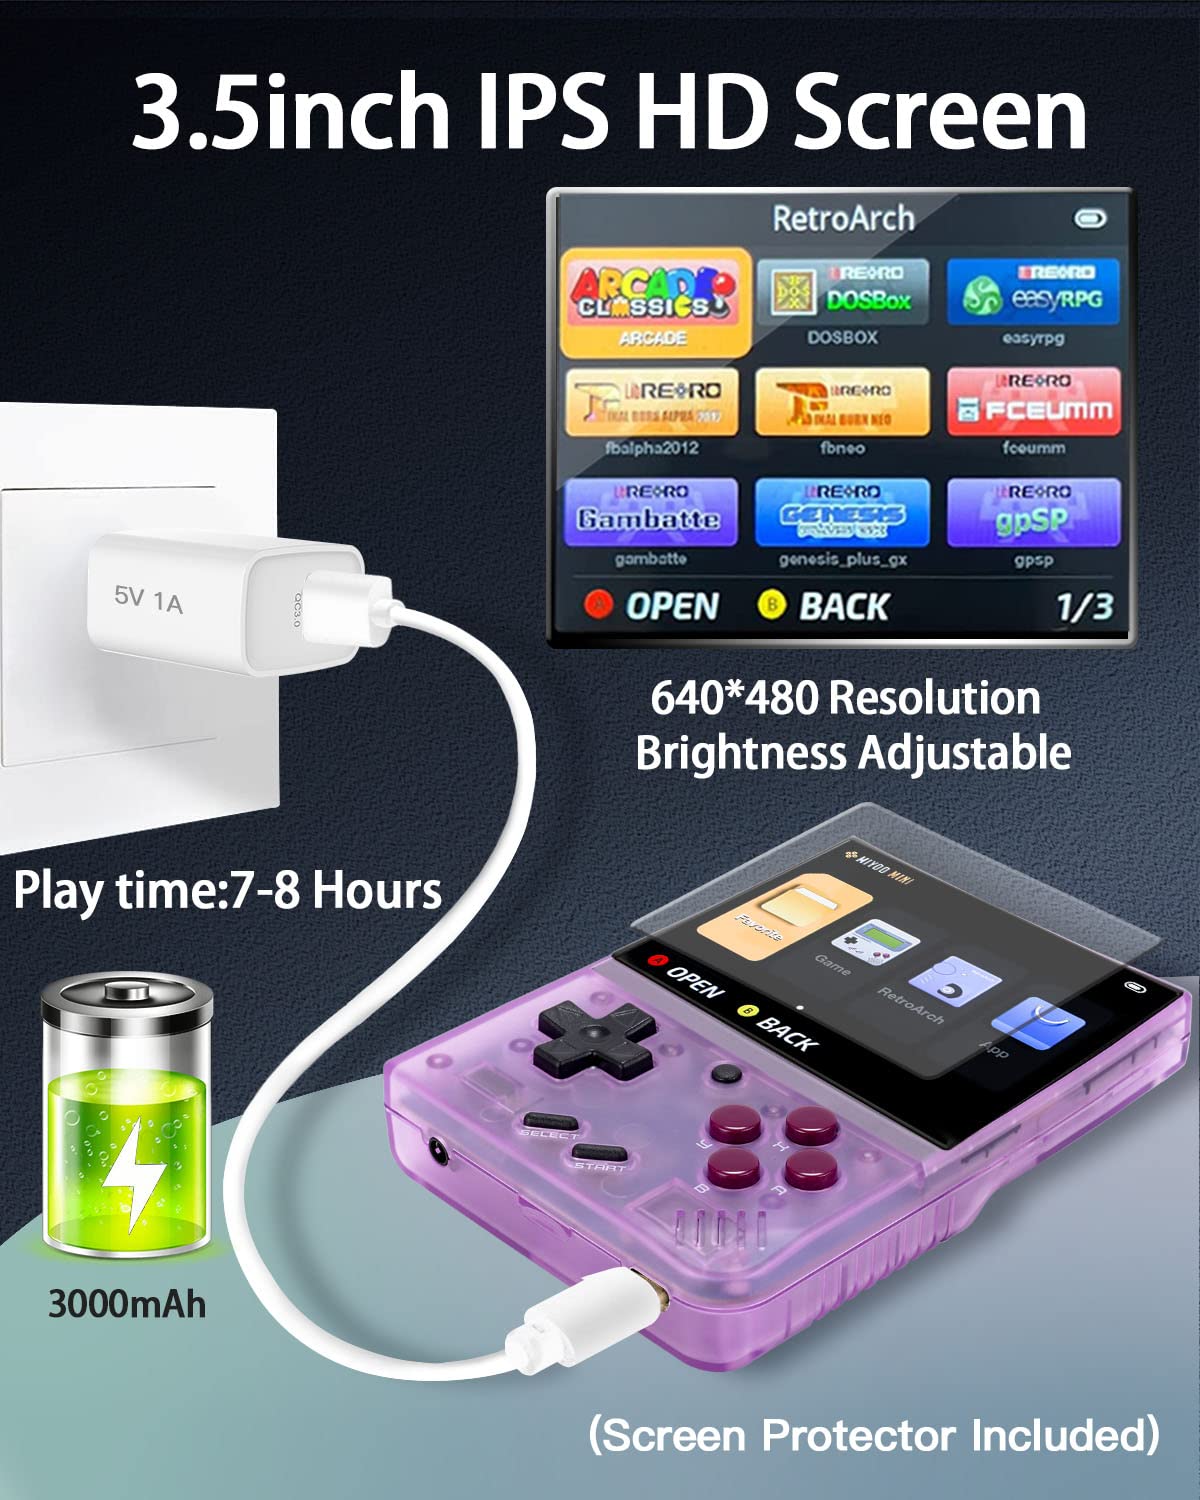 Miyoo Mini Plus,Retro Handheld Game Console with 64G TF Card,Support 10000+Games,3.5-inch Portable Rechargeable Open Source Game Console Emulator with Storage Case,Support WiFi.(Purple)